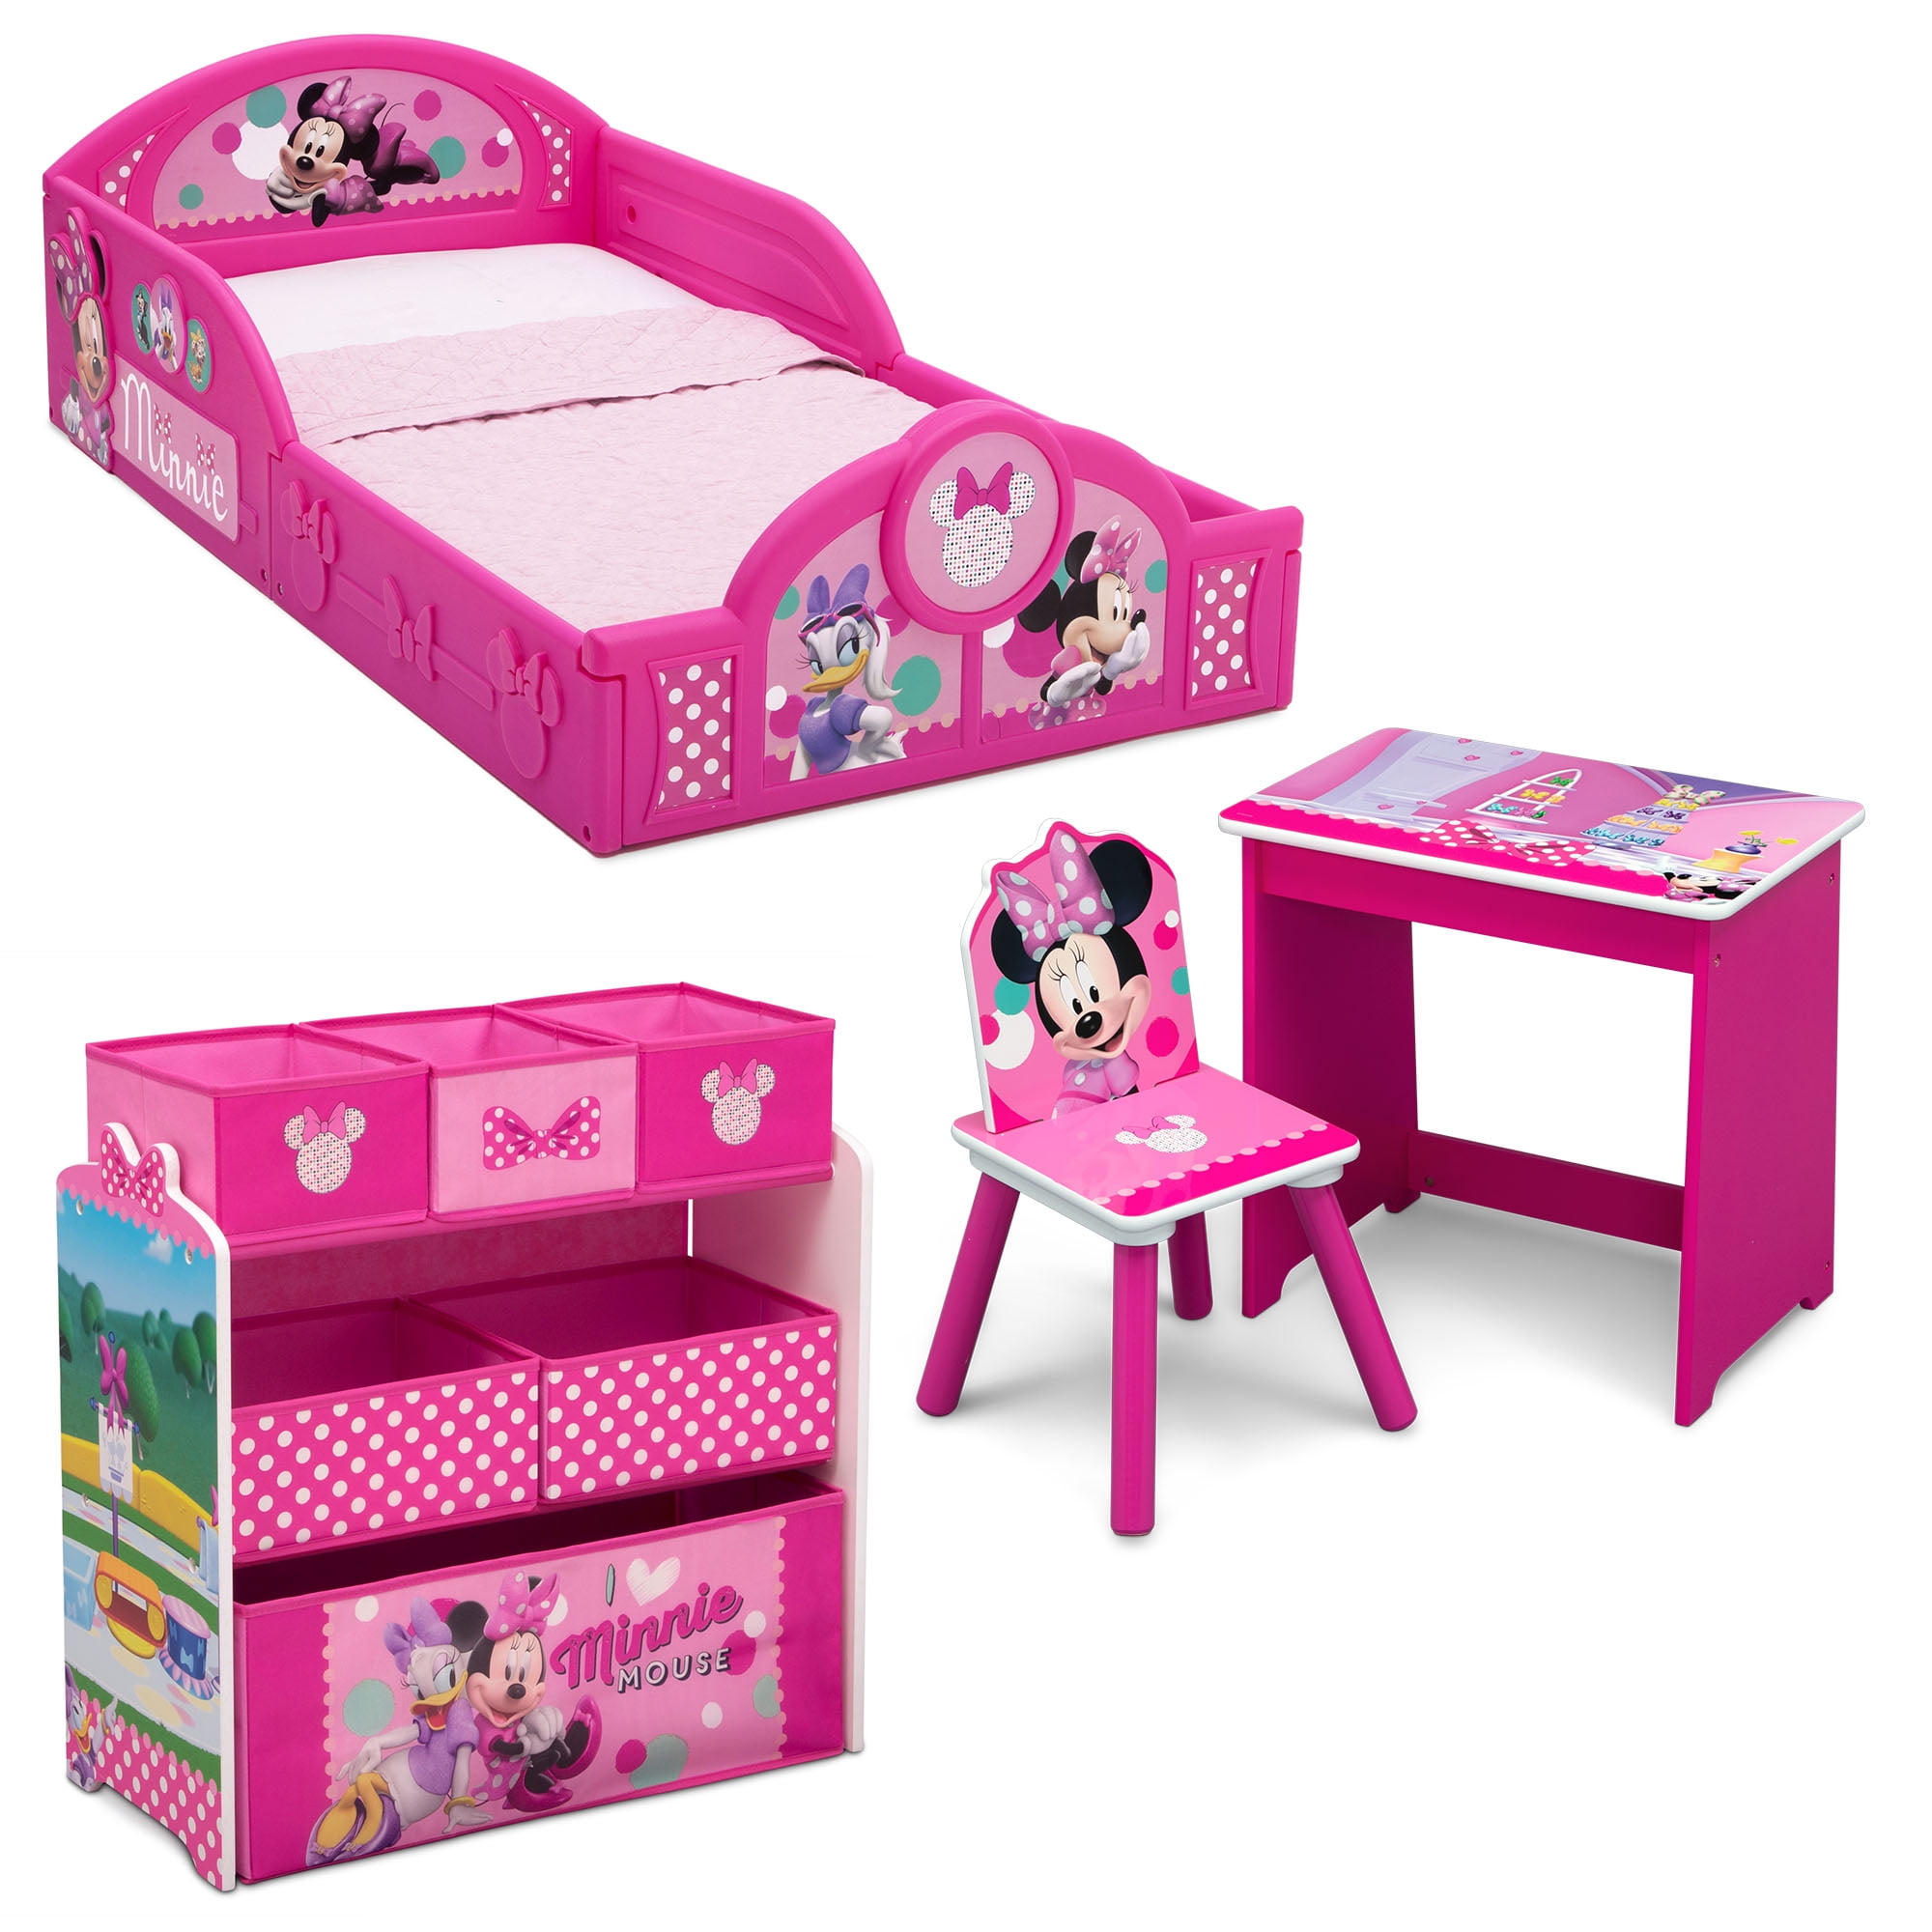 Disney Minnie Mouse Chair Desk With, Minnie Mouse Upholstered Chair With Ottoman Storage